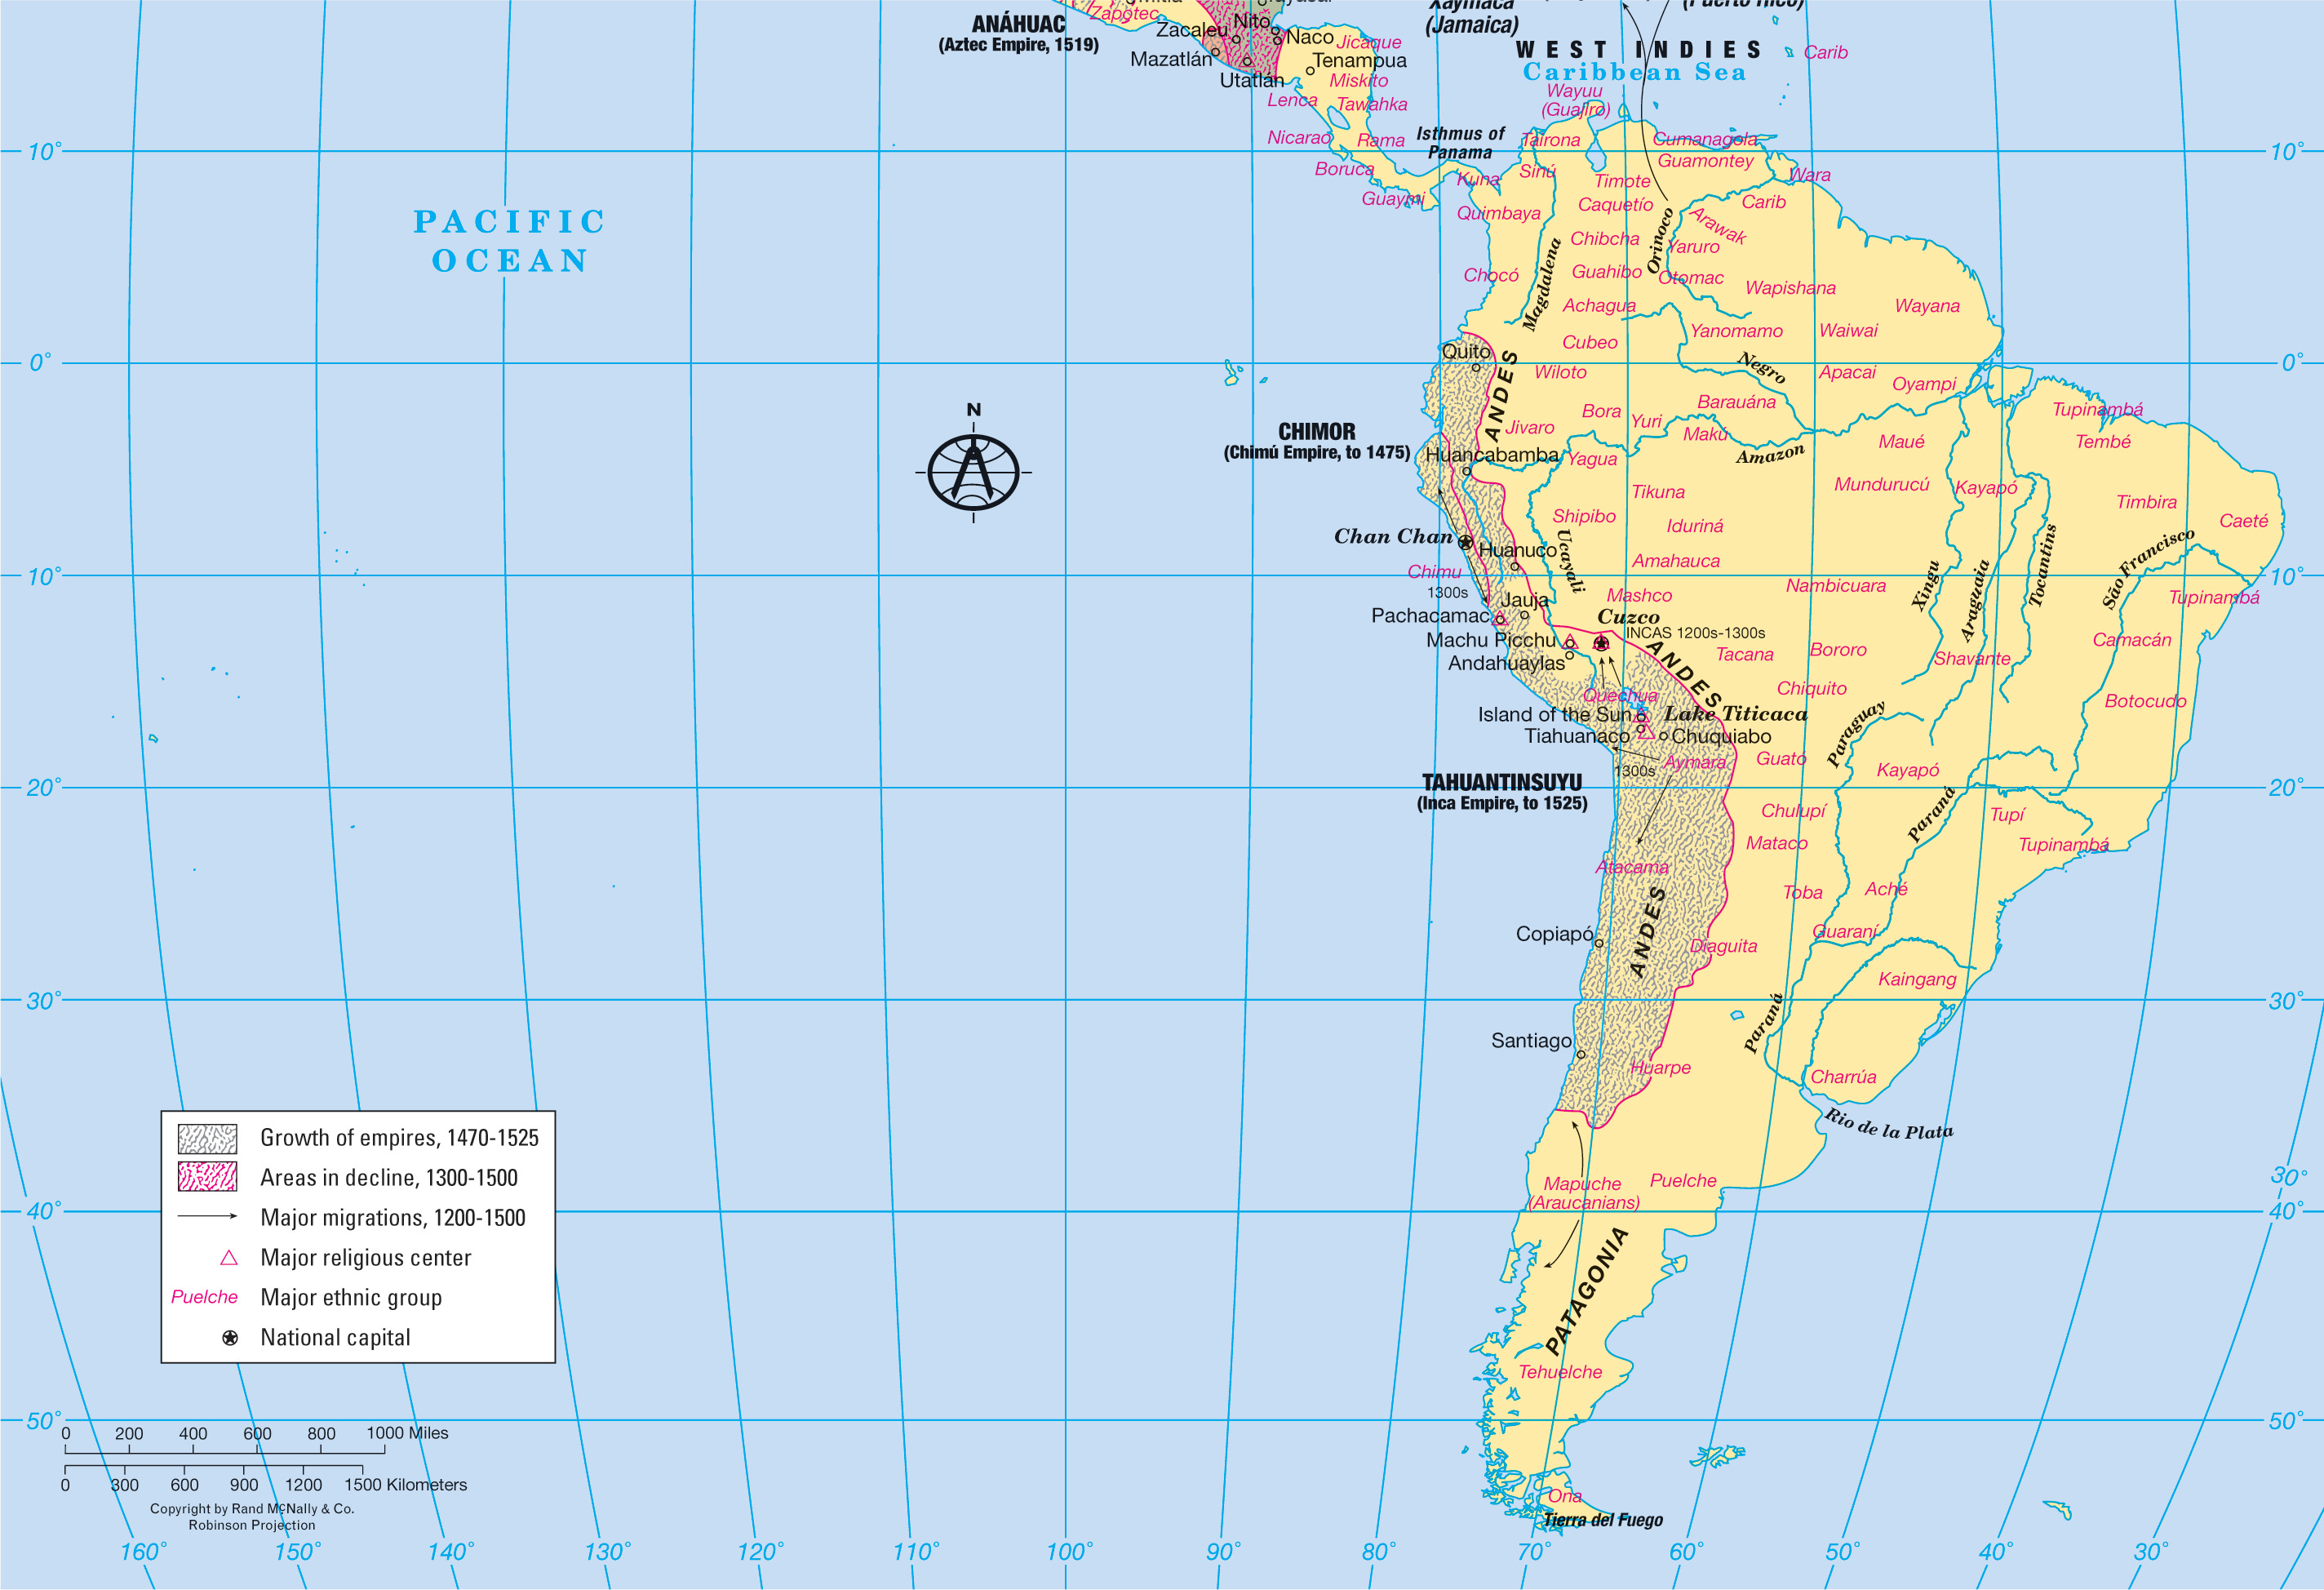 map of South America shows location of Native American populations